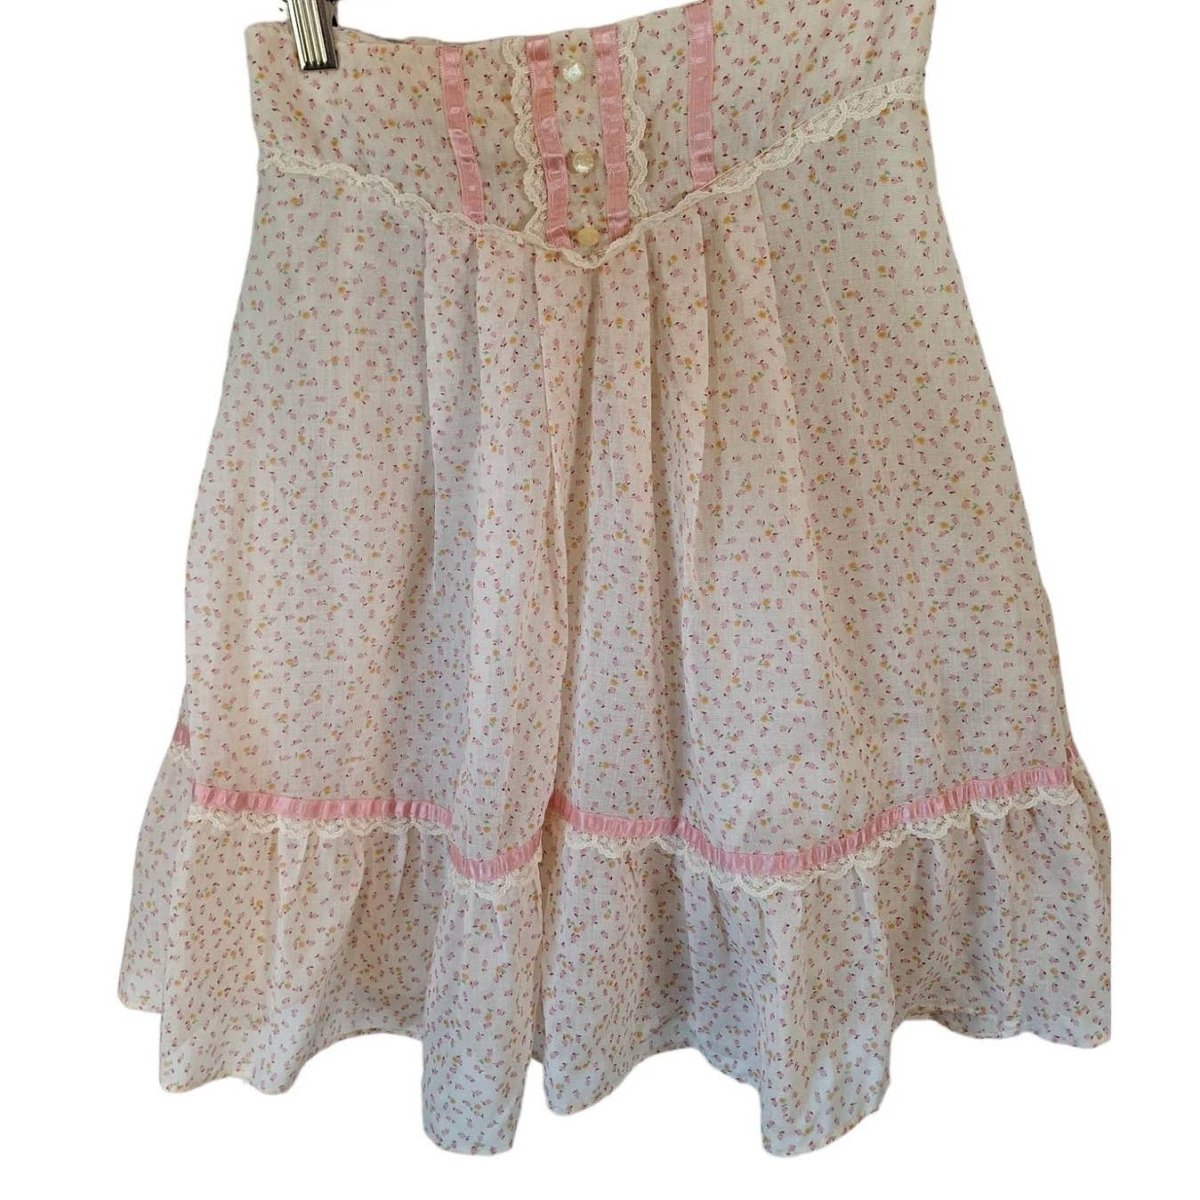 Vintage 70s Kids Prairie Skirt and Blouse Set Girls Size 8 - themallvintage The Mall Vintage